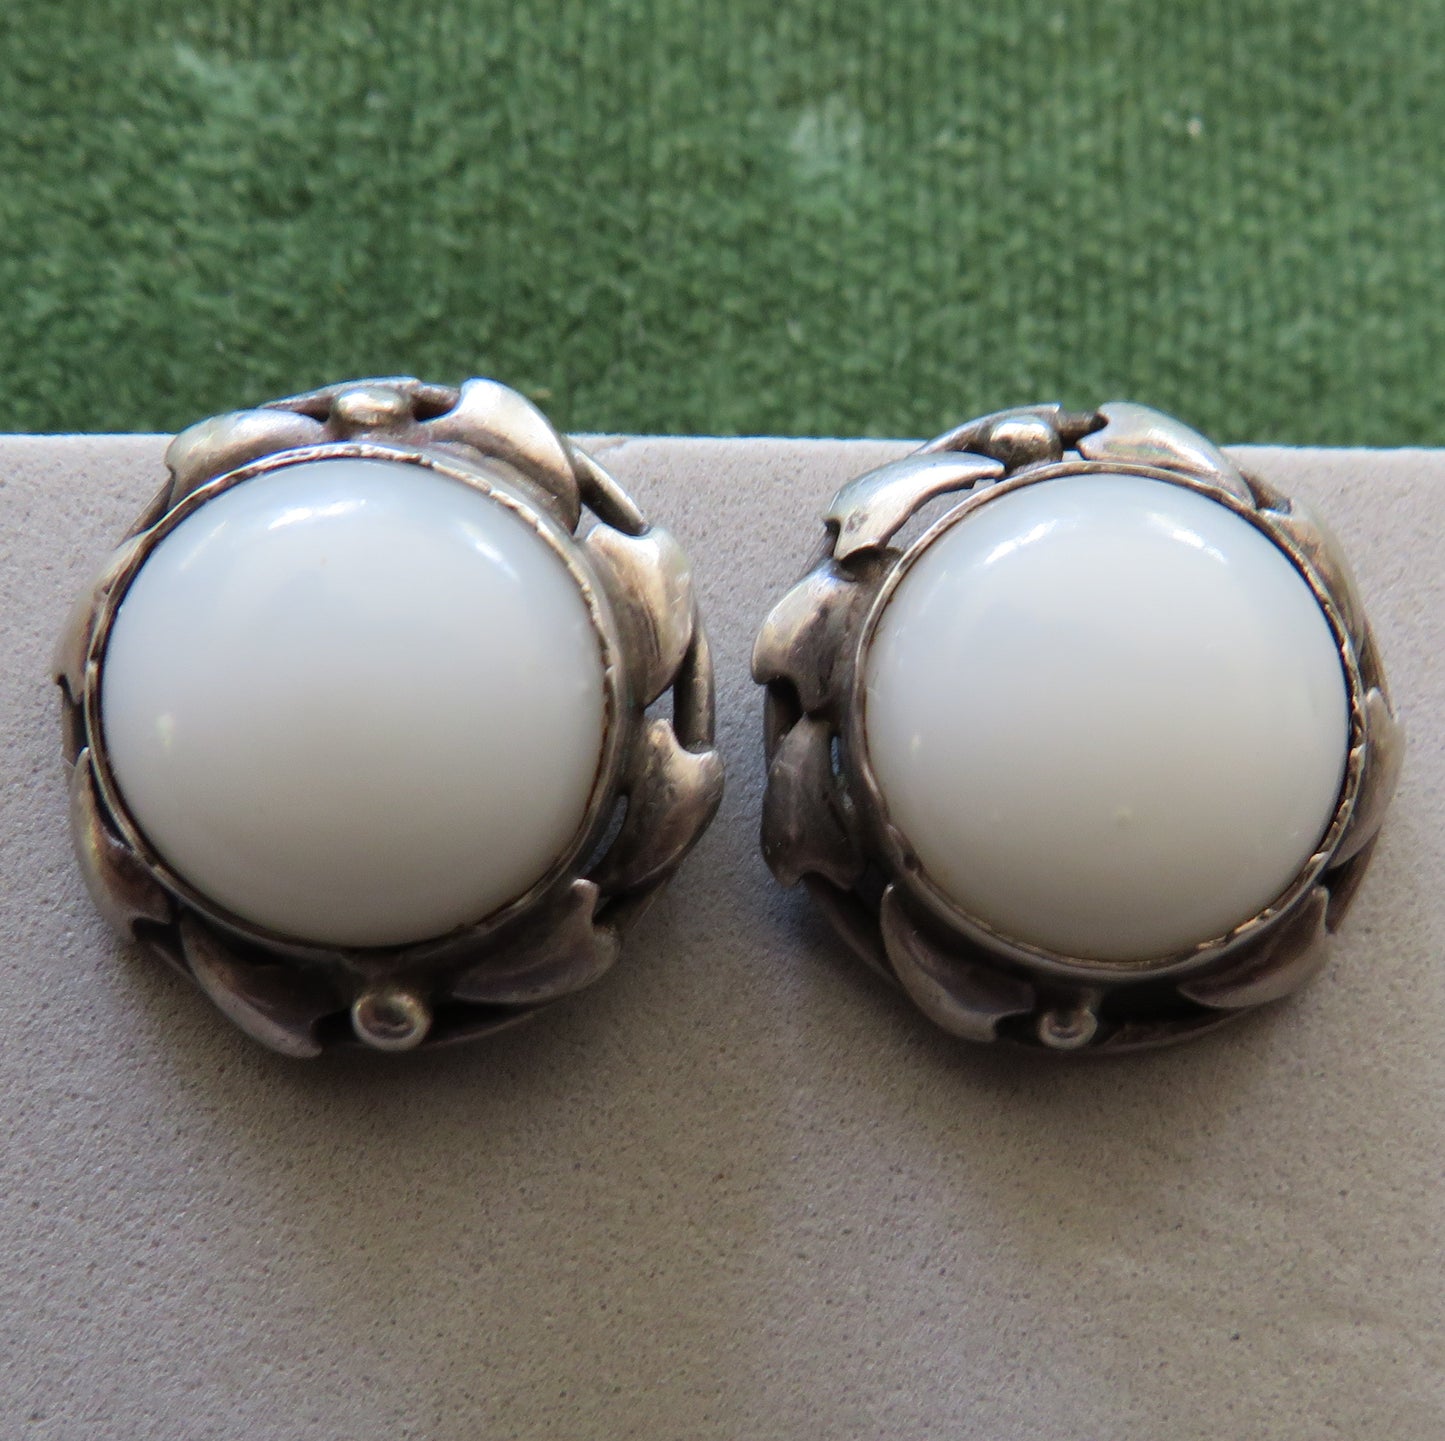 Rhoda Wager Attributed Arts & Crafts Silver Earrings (Screw Fastening) with gum leaf design and milk glass insert